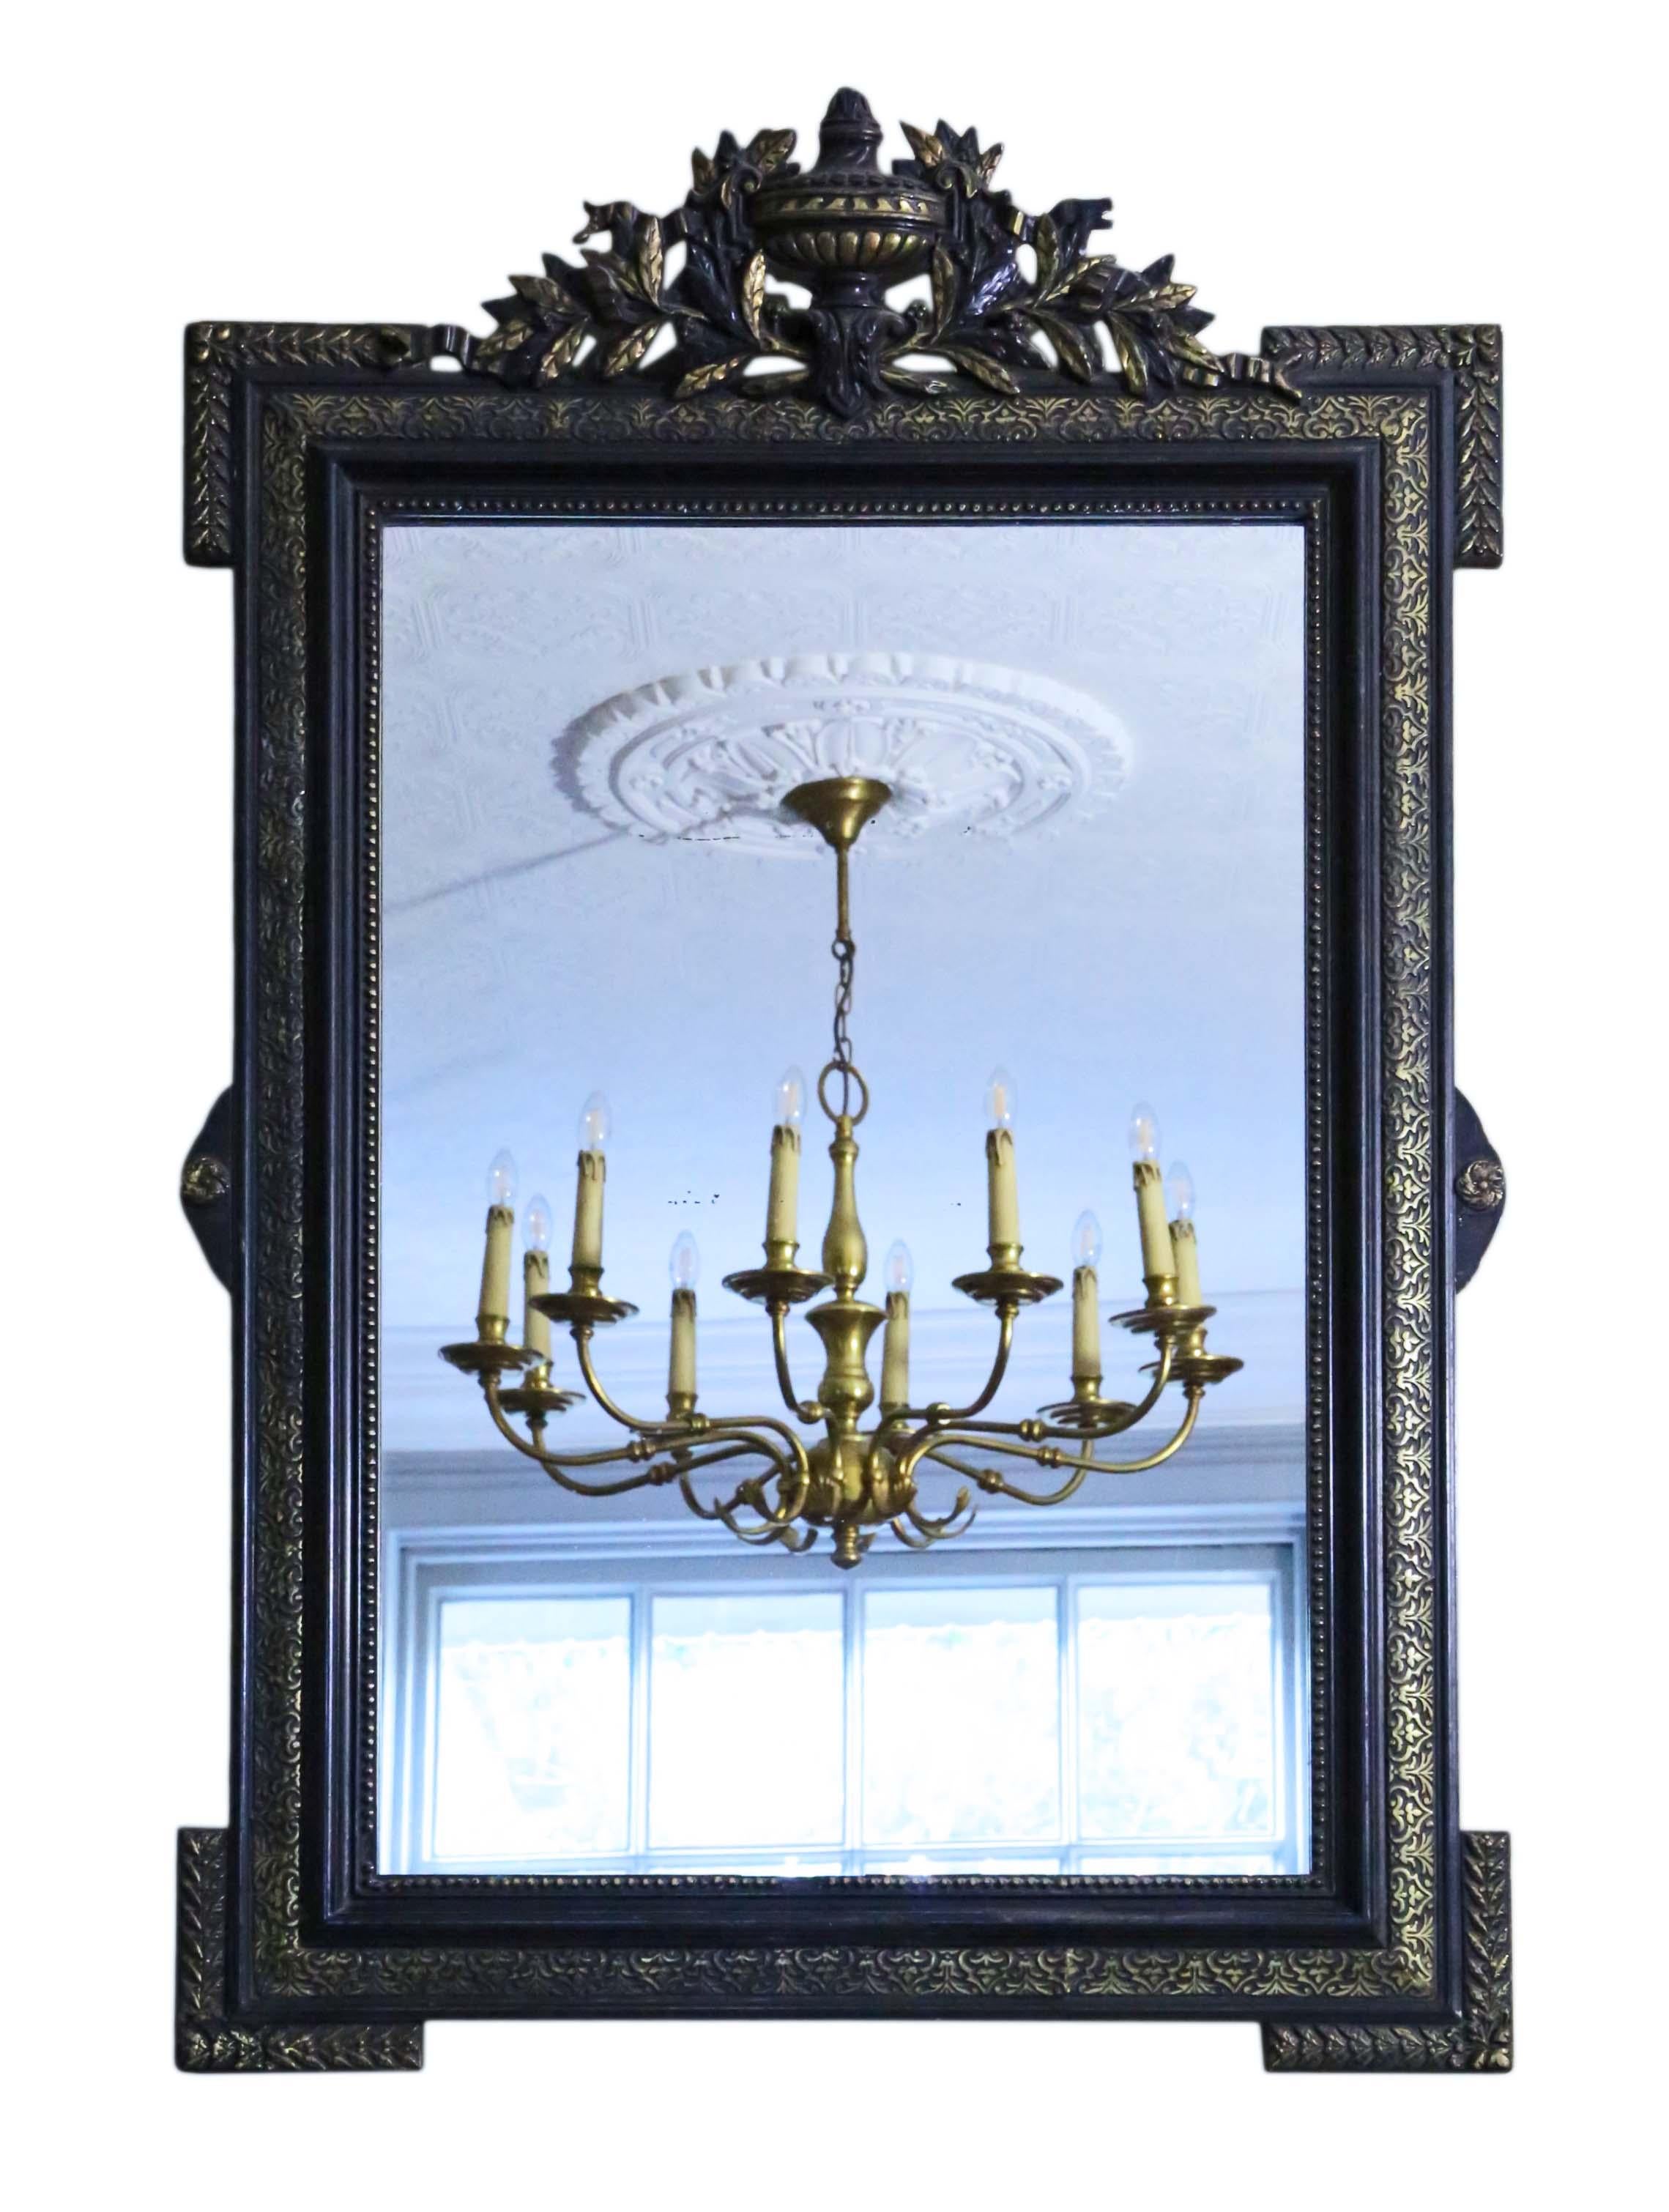 Antique 19th Century large quality ebonised and gilt wall mirror or overmantle.

An impressive rare find, that would look amazing in the right location. No loose joints or woodworm.

The original mirrored glass has light/medium oxidation and age